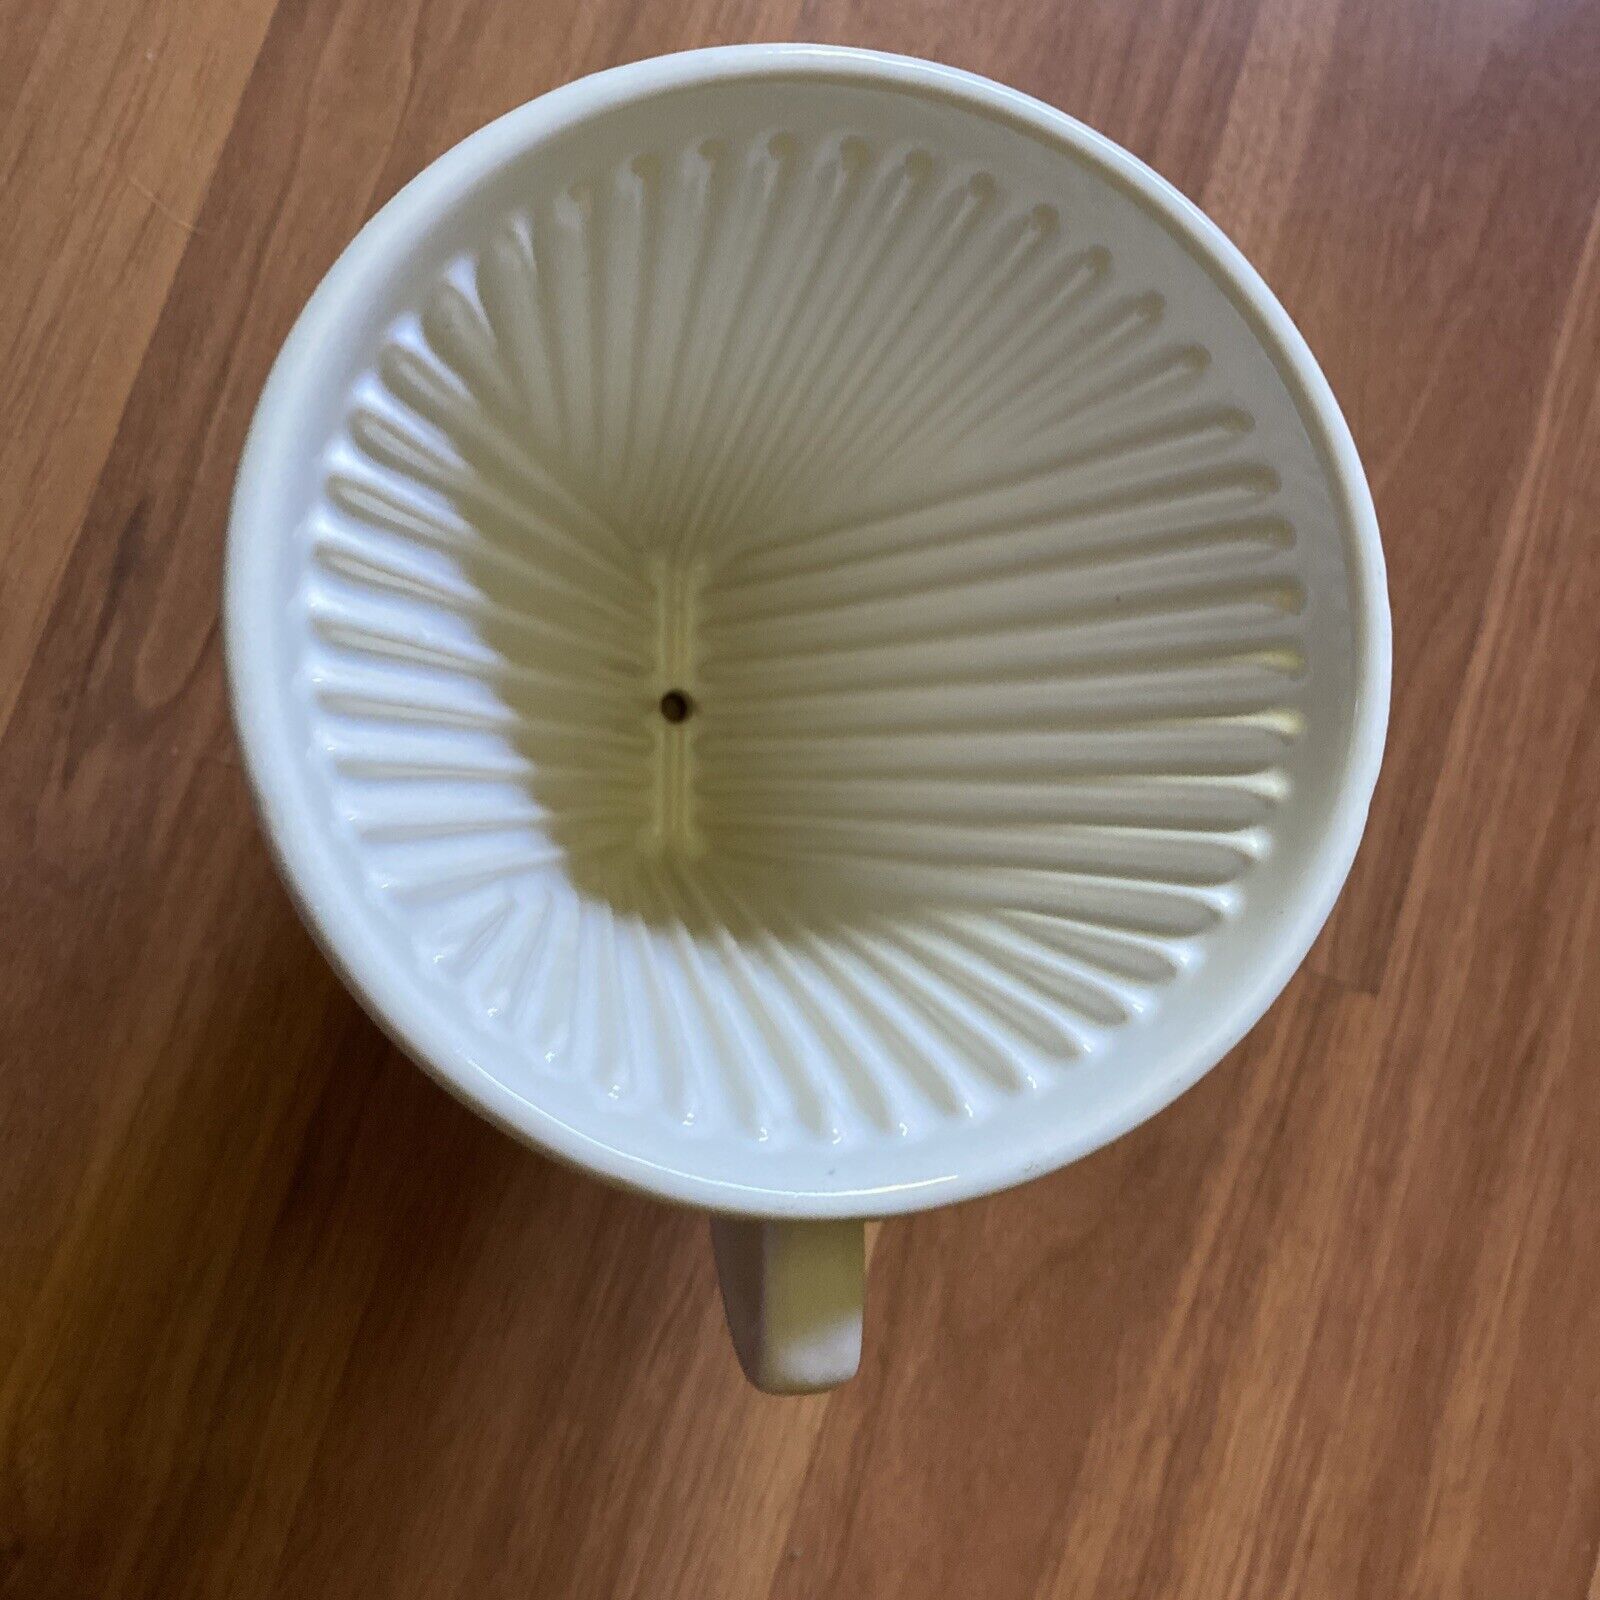 MELITTA 103 White Porcelain Coffee Filter Holder Pour Over Large 1 Hole